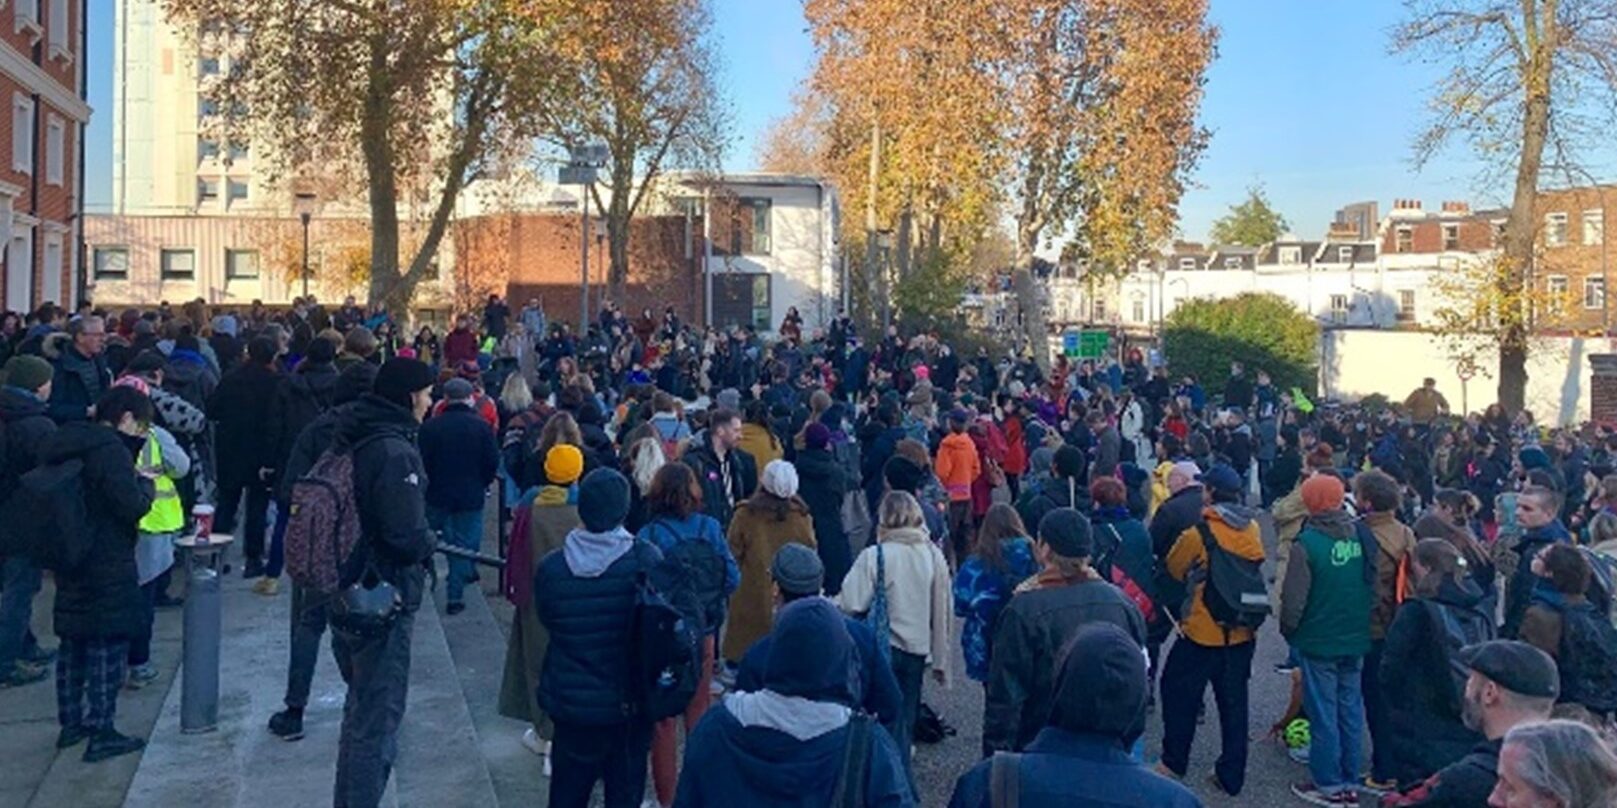 Huge crowds gathered outside of Goldsmiths, University of London, for the opening rally of a 3-week strike by Goldsmiths UCU